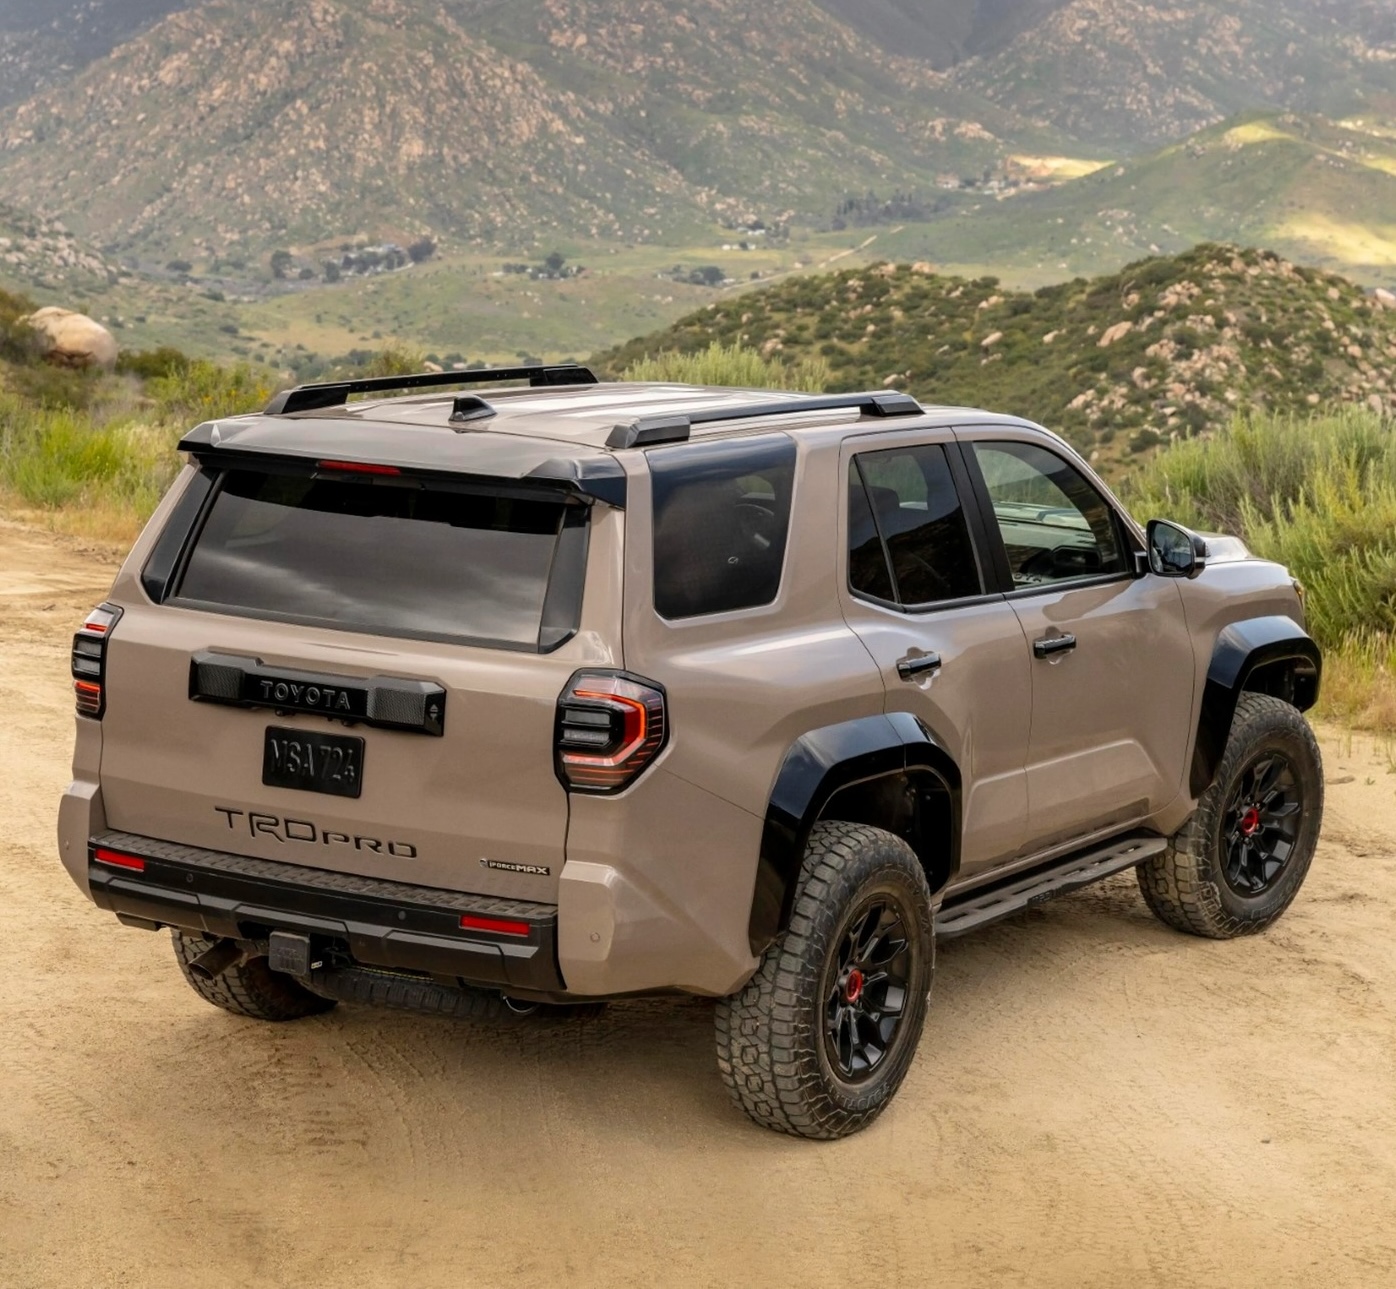 2025 Toyota 4runner 2025 4Runner Photos & Specs! 🔥 Trailhunter, TRD Pro, Off-Road, Limited Trims 2025 Toyota 4Runner Wallpapers 3 copy